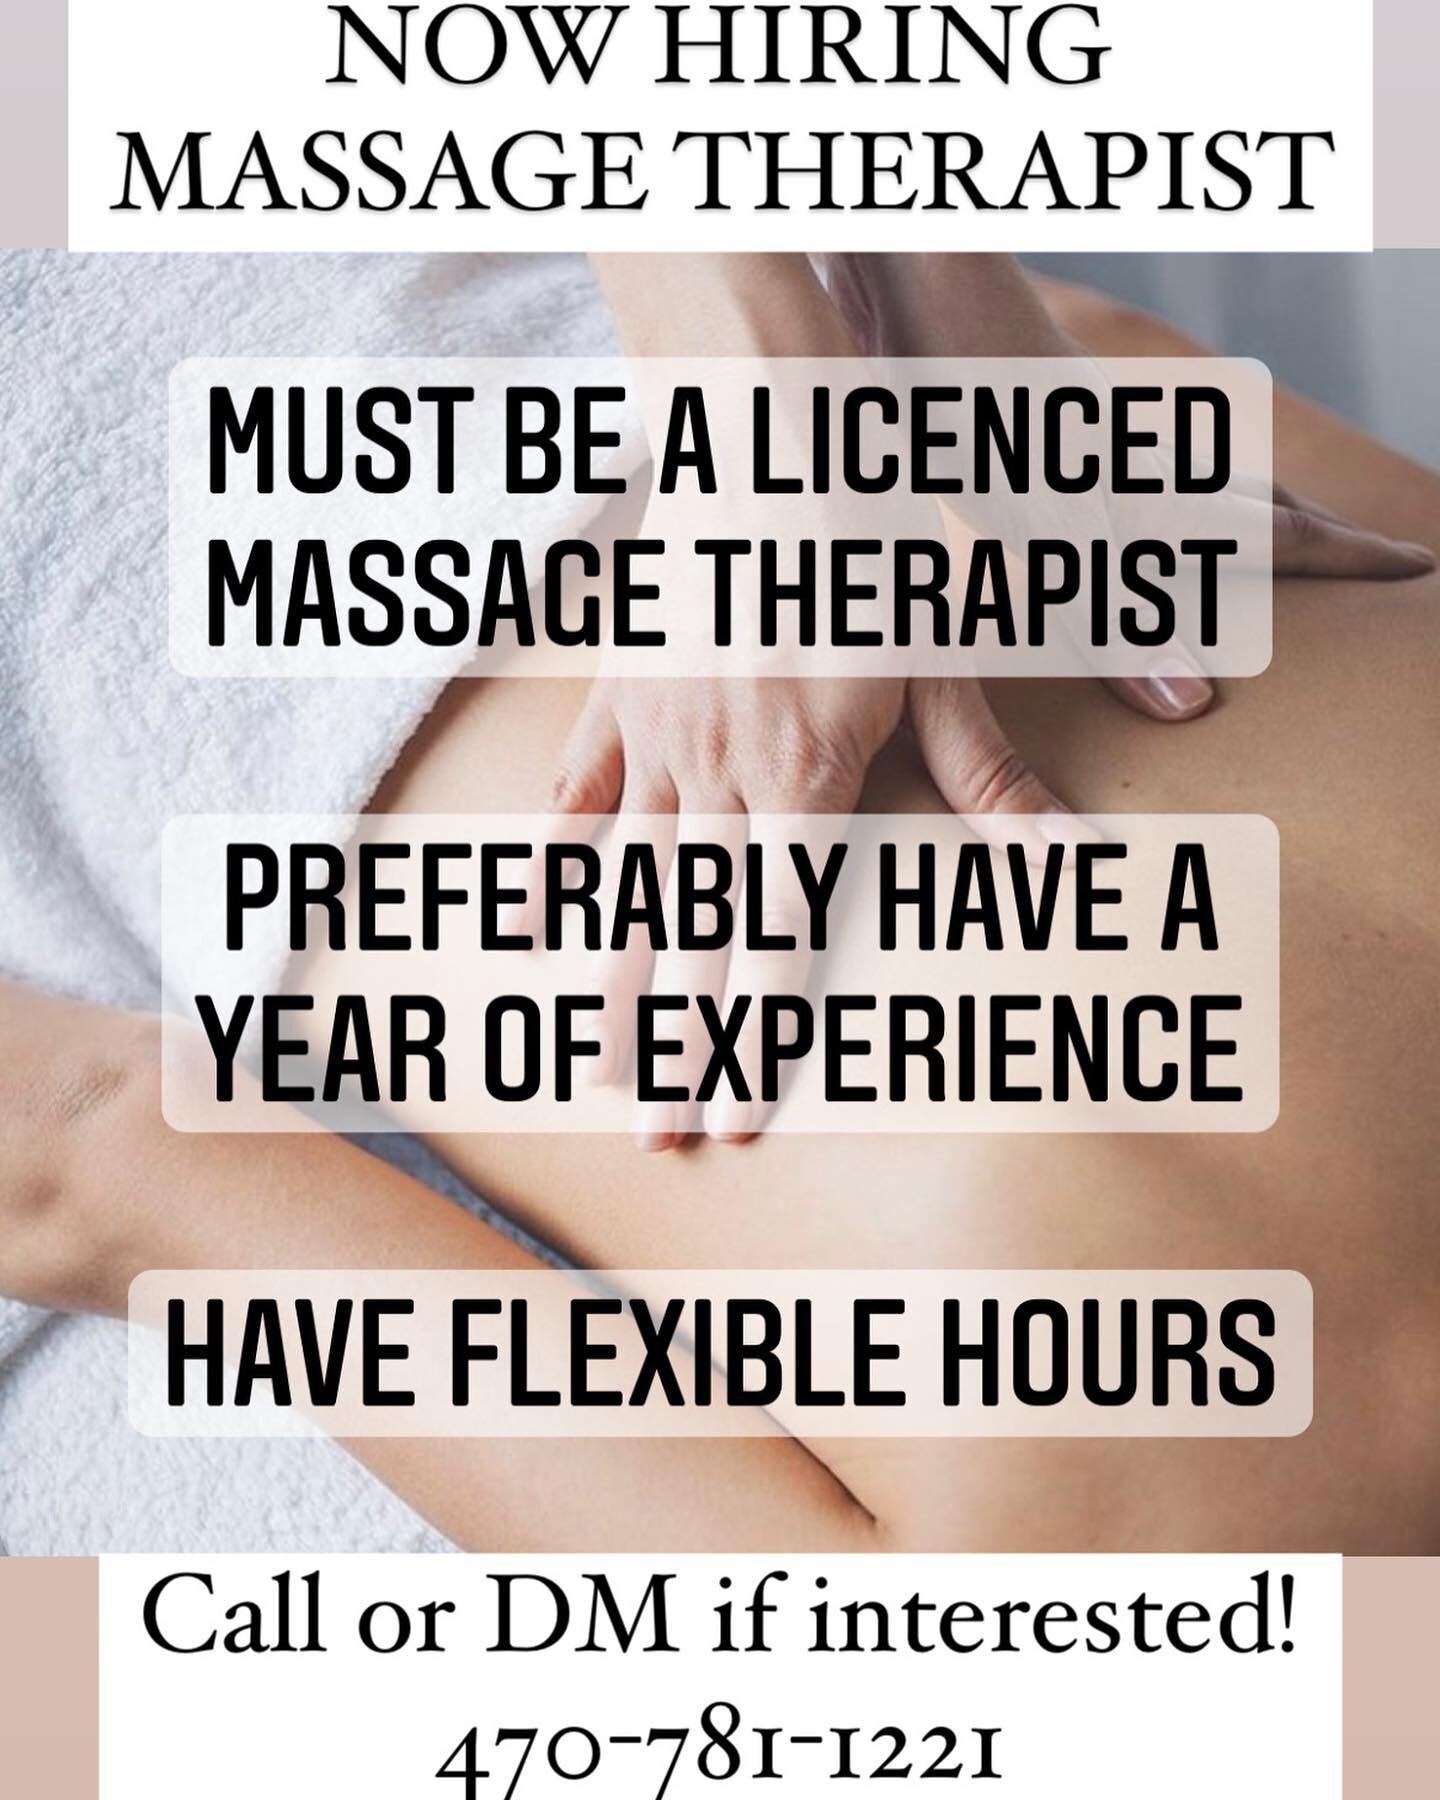 Looking for Massage Therapists!
If interested please call or DM us 
470-781-1221